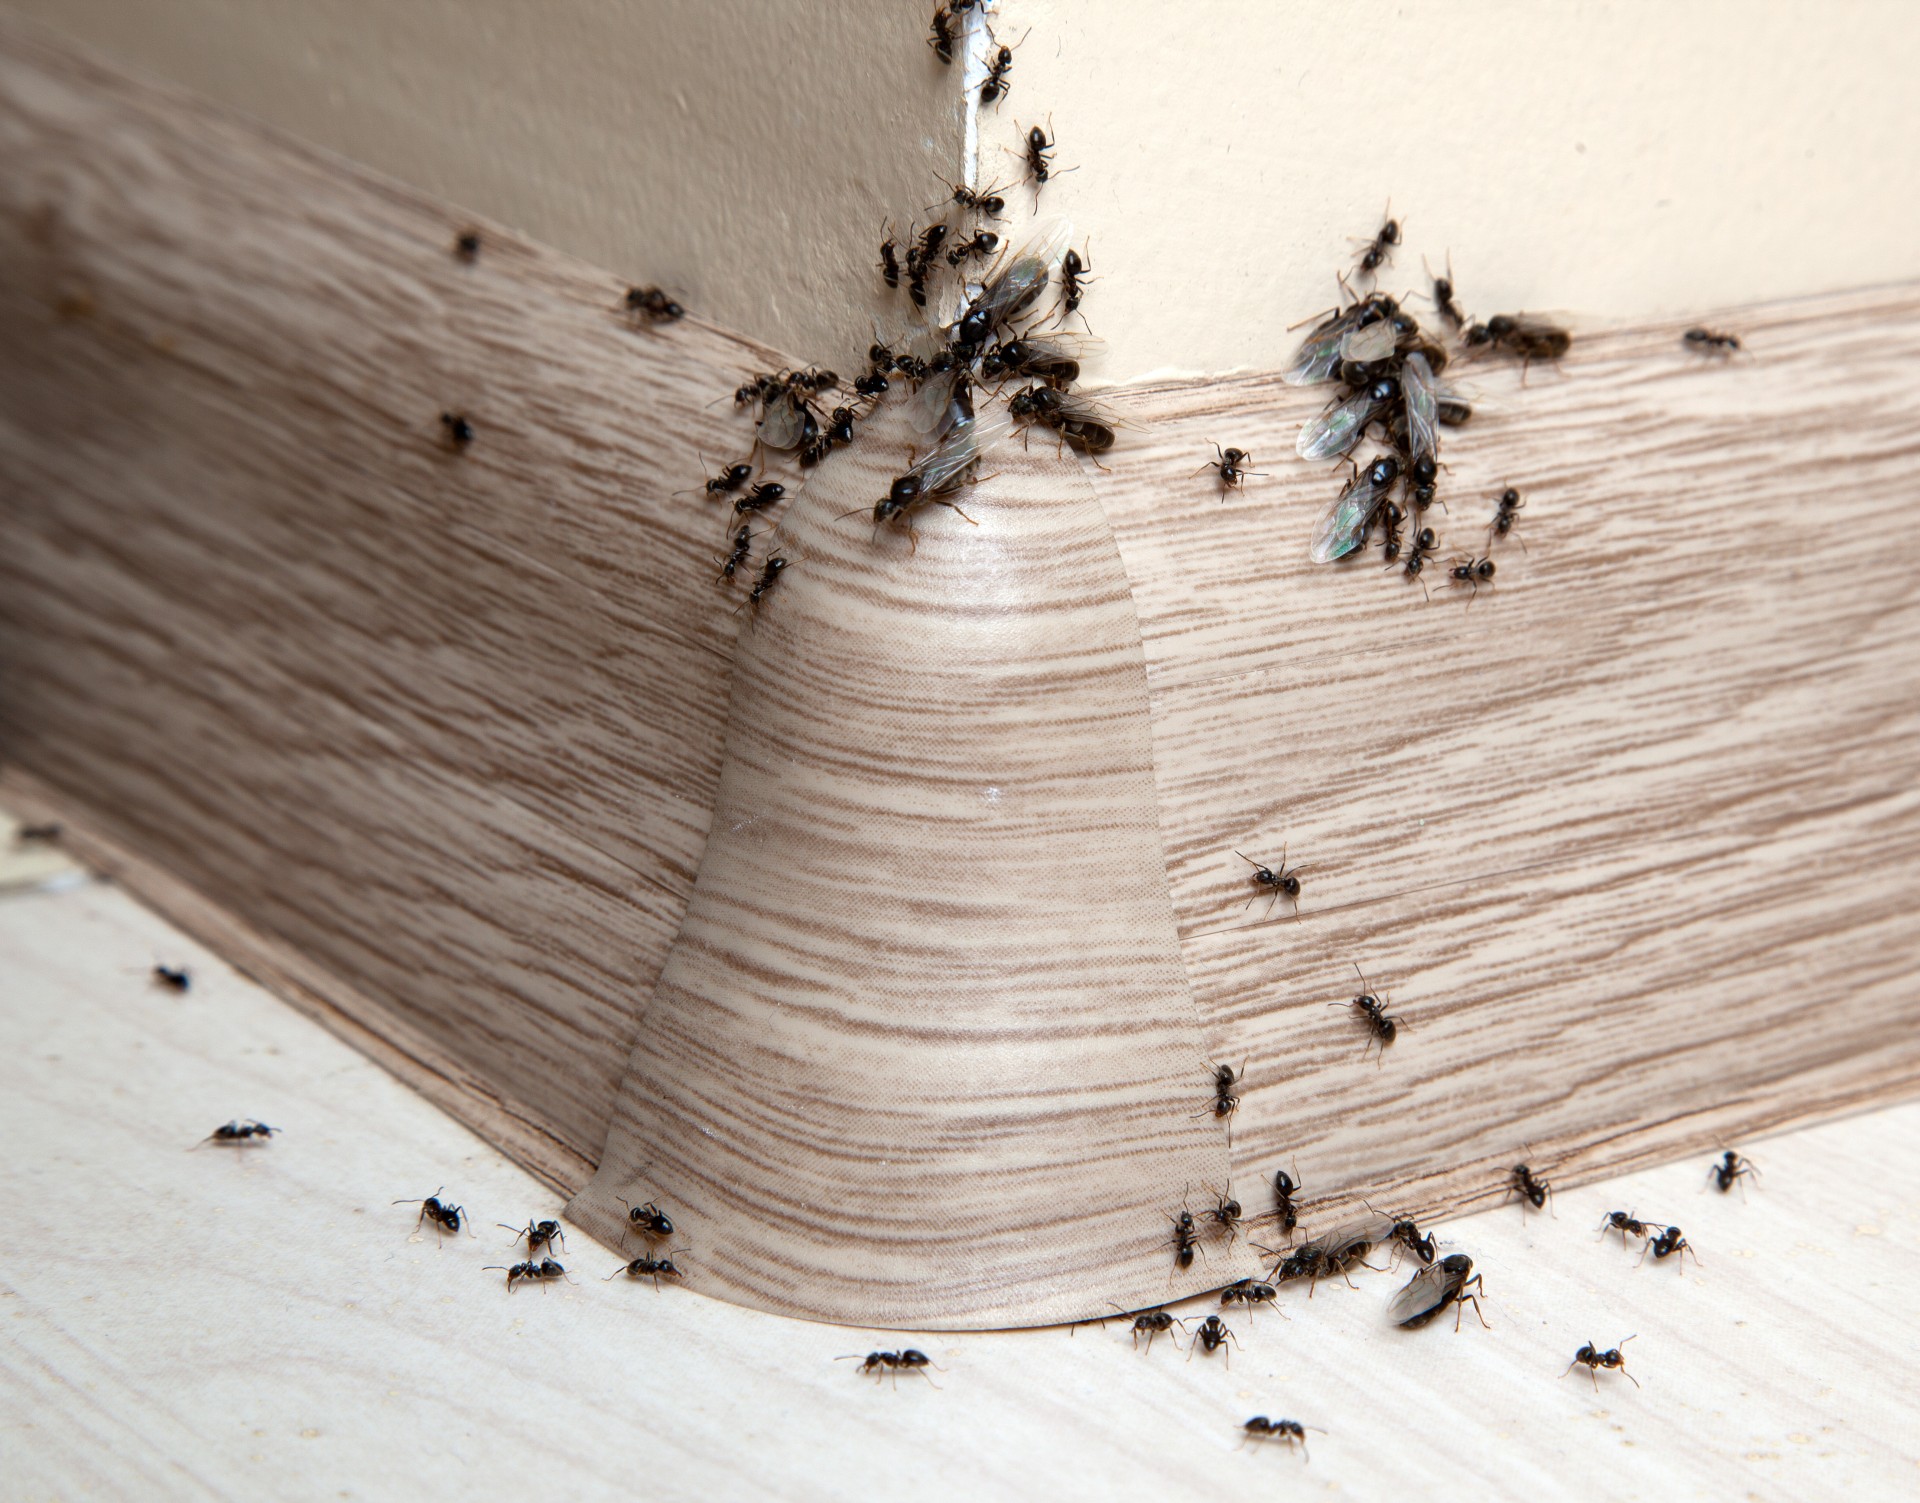 Ant Infestation, Pest Control in Upper Edmonton, N18. Call Now 020 8166 9746